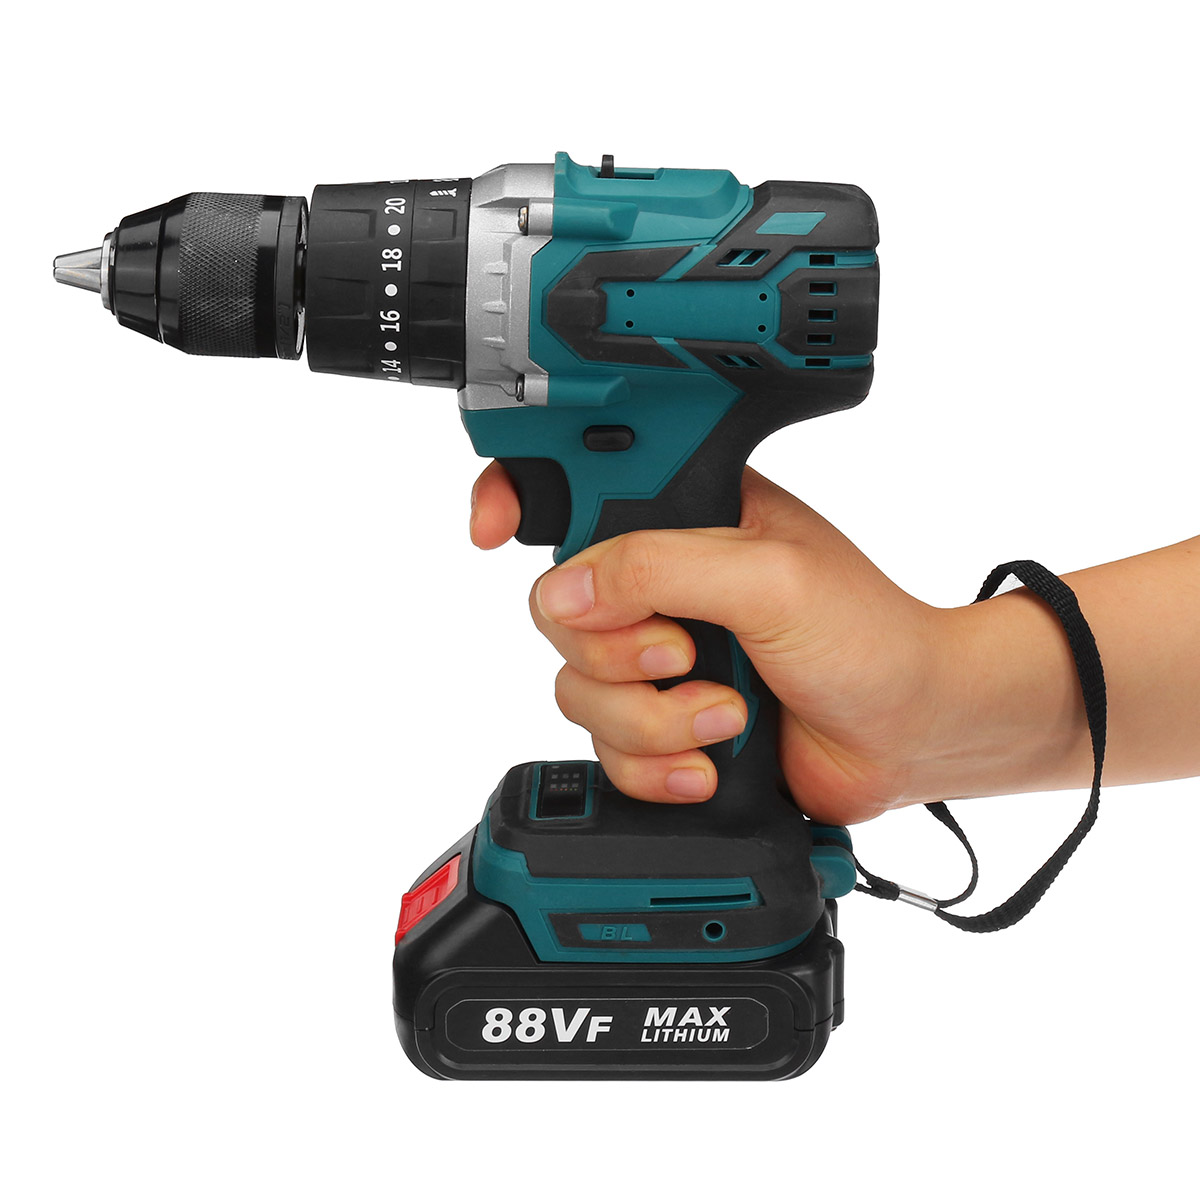 88VF-3-IN-1-Cordless-Brushless-Drill-Electric-Screwdriver-Hammer-Impact-Drill-203-Torque-W-12pcs-Bat-1854945-8